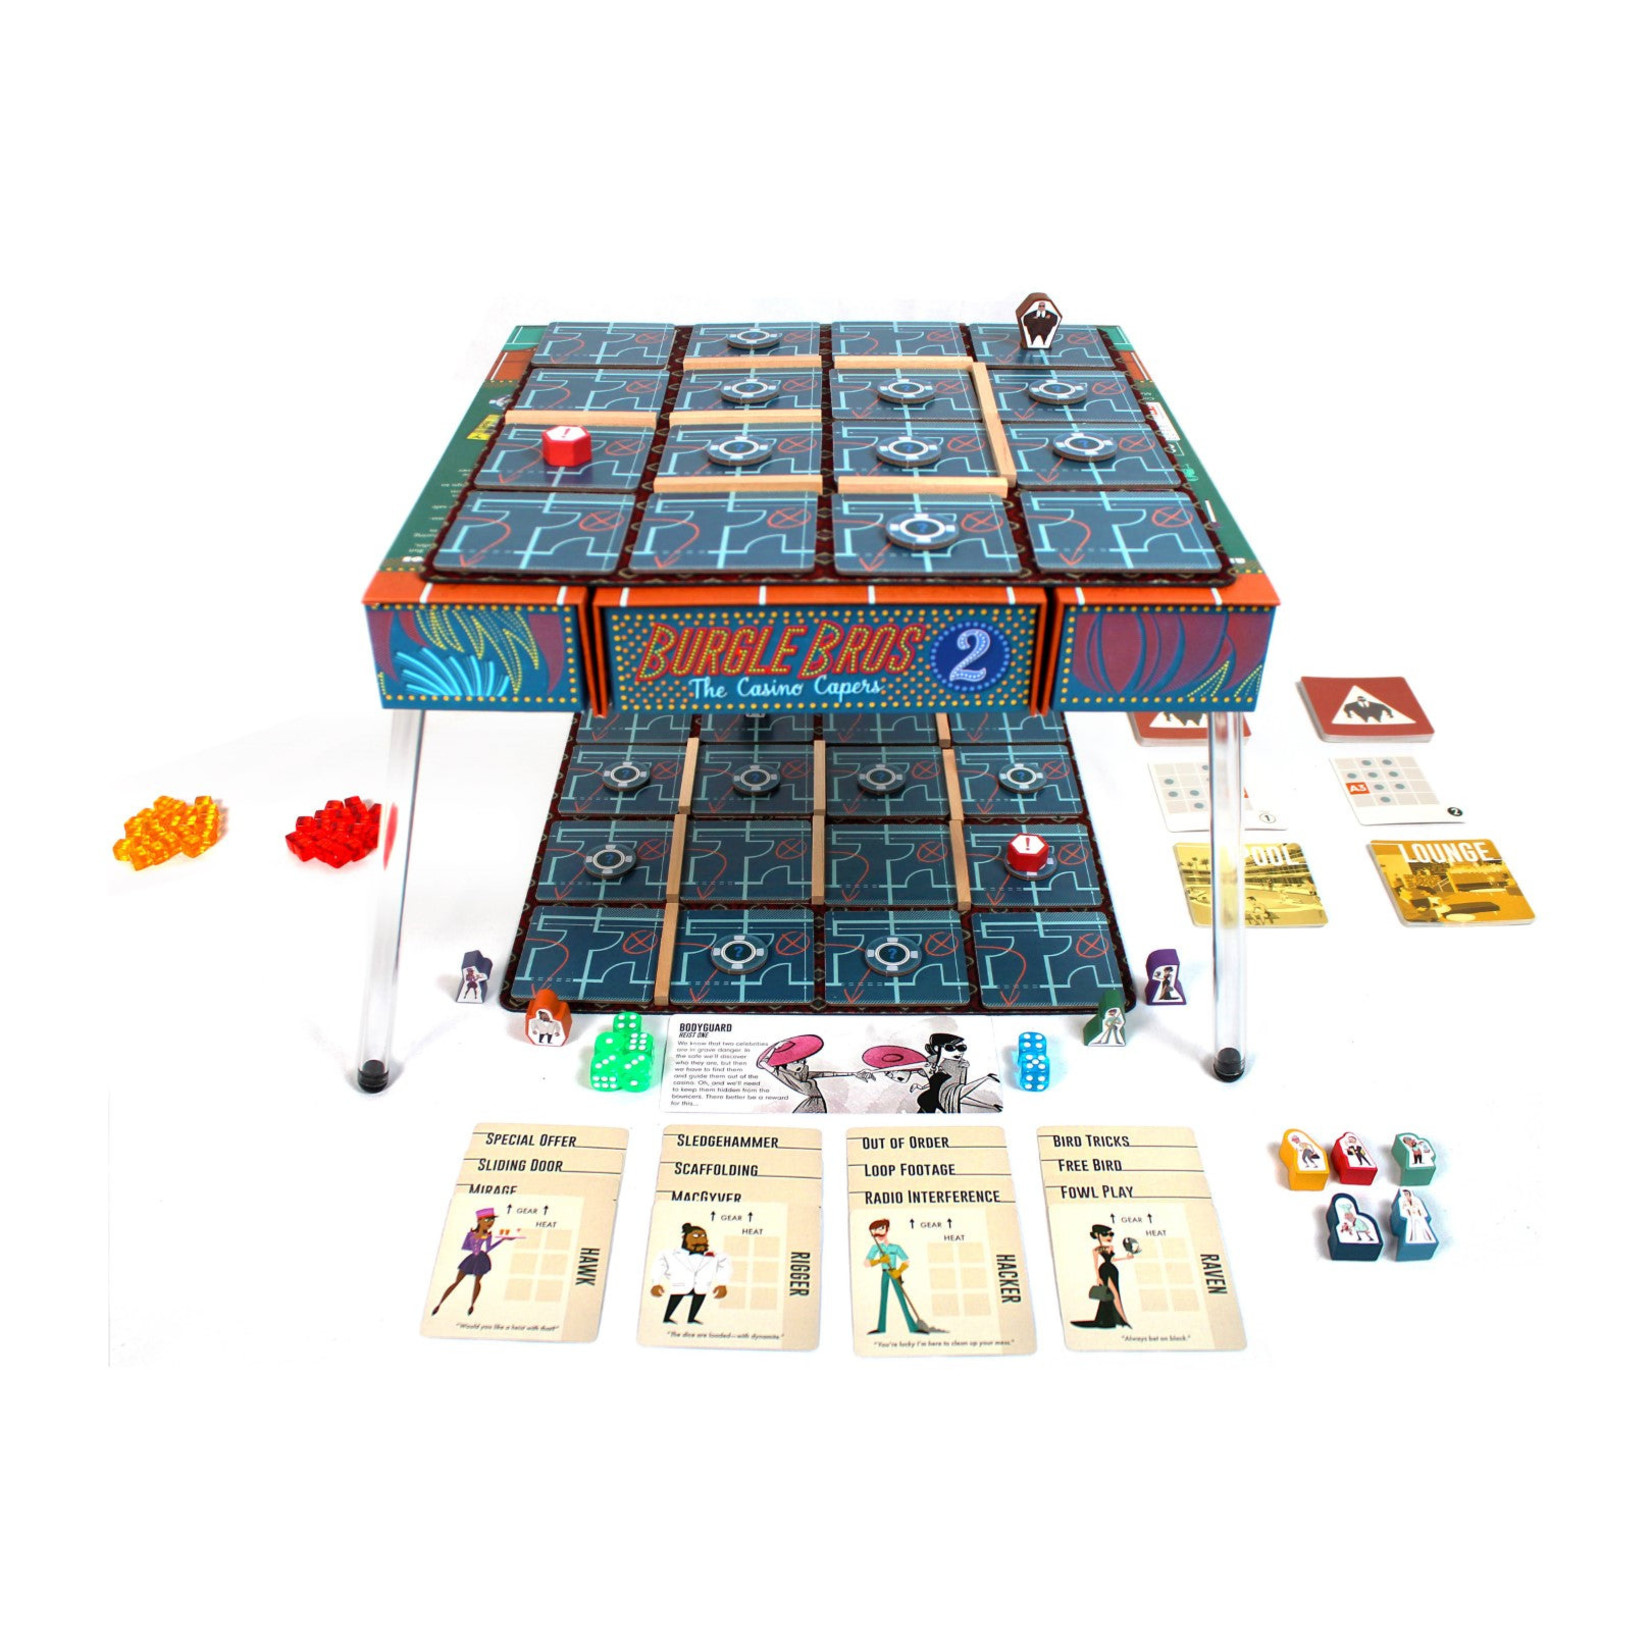 Fowers Games Burgle Bros 2: The Casino Capers